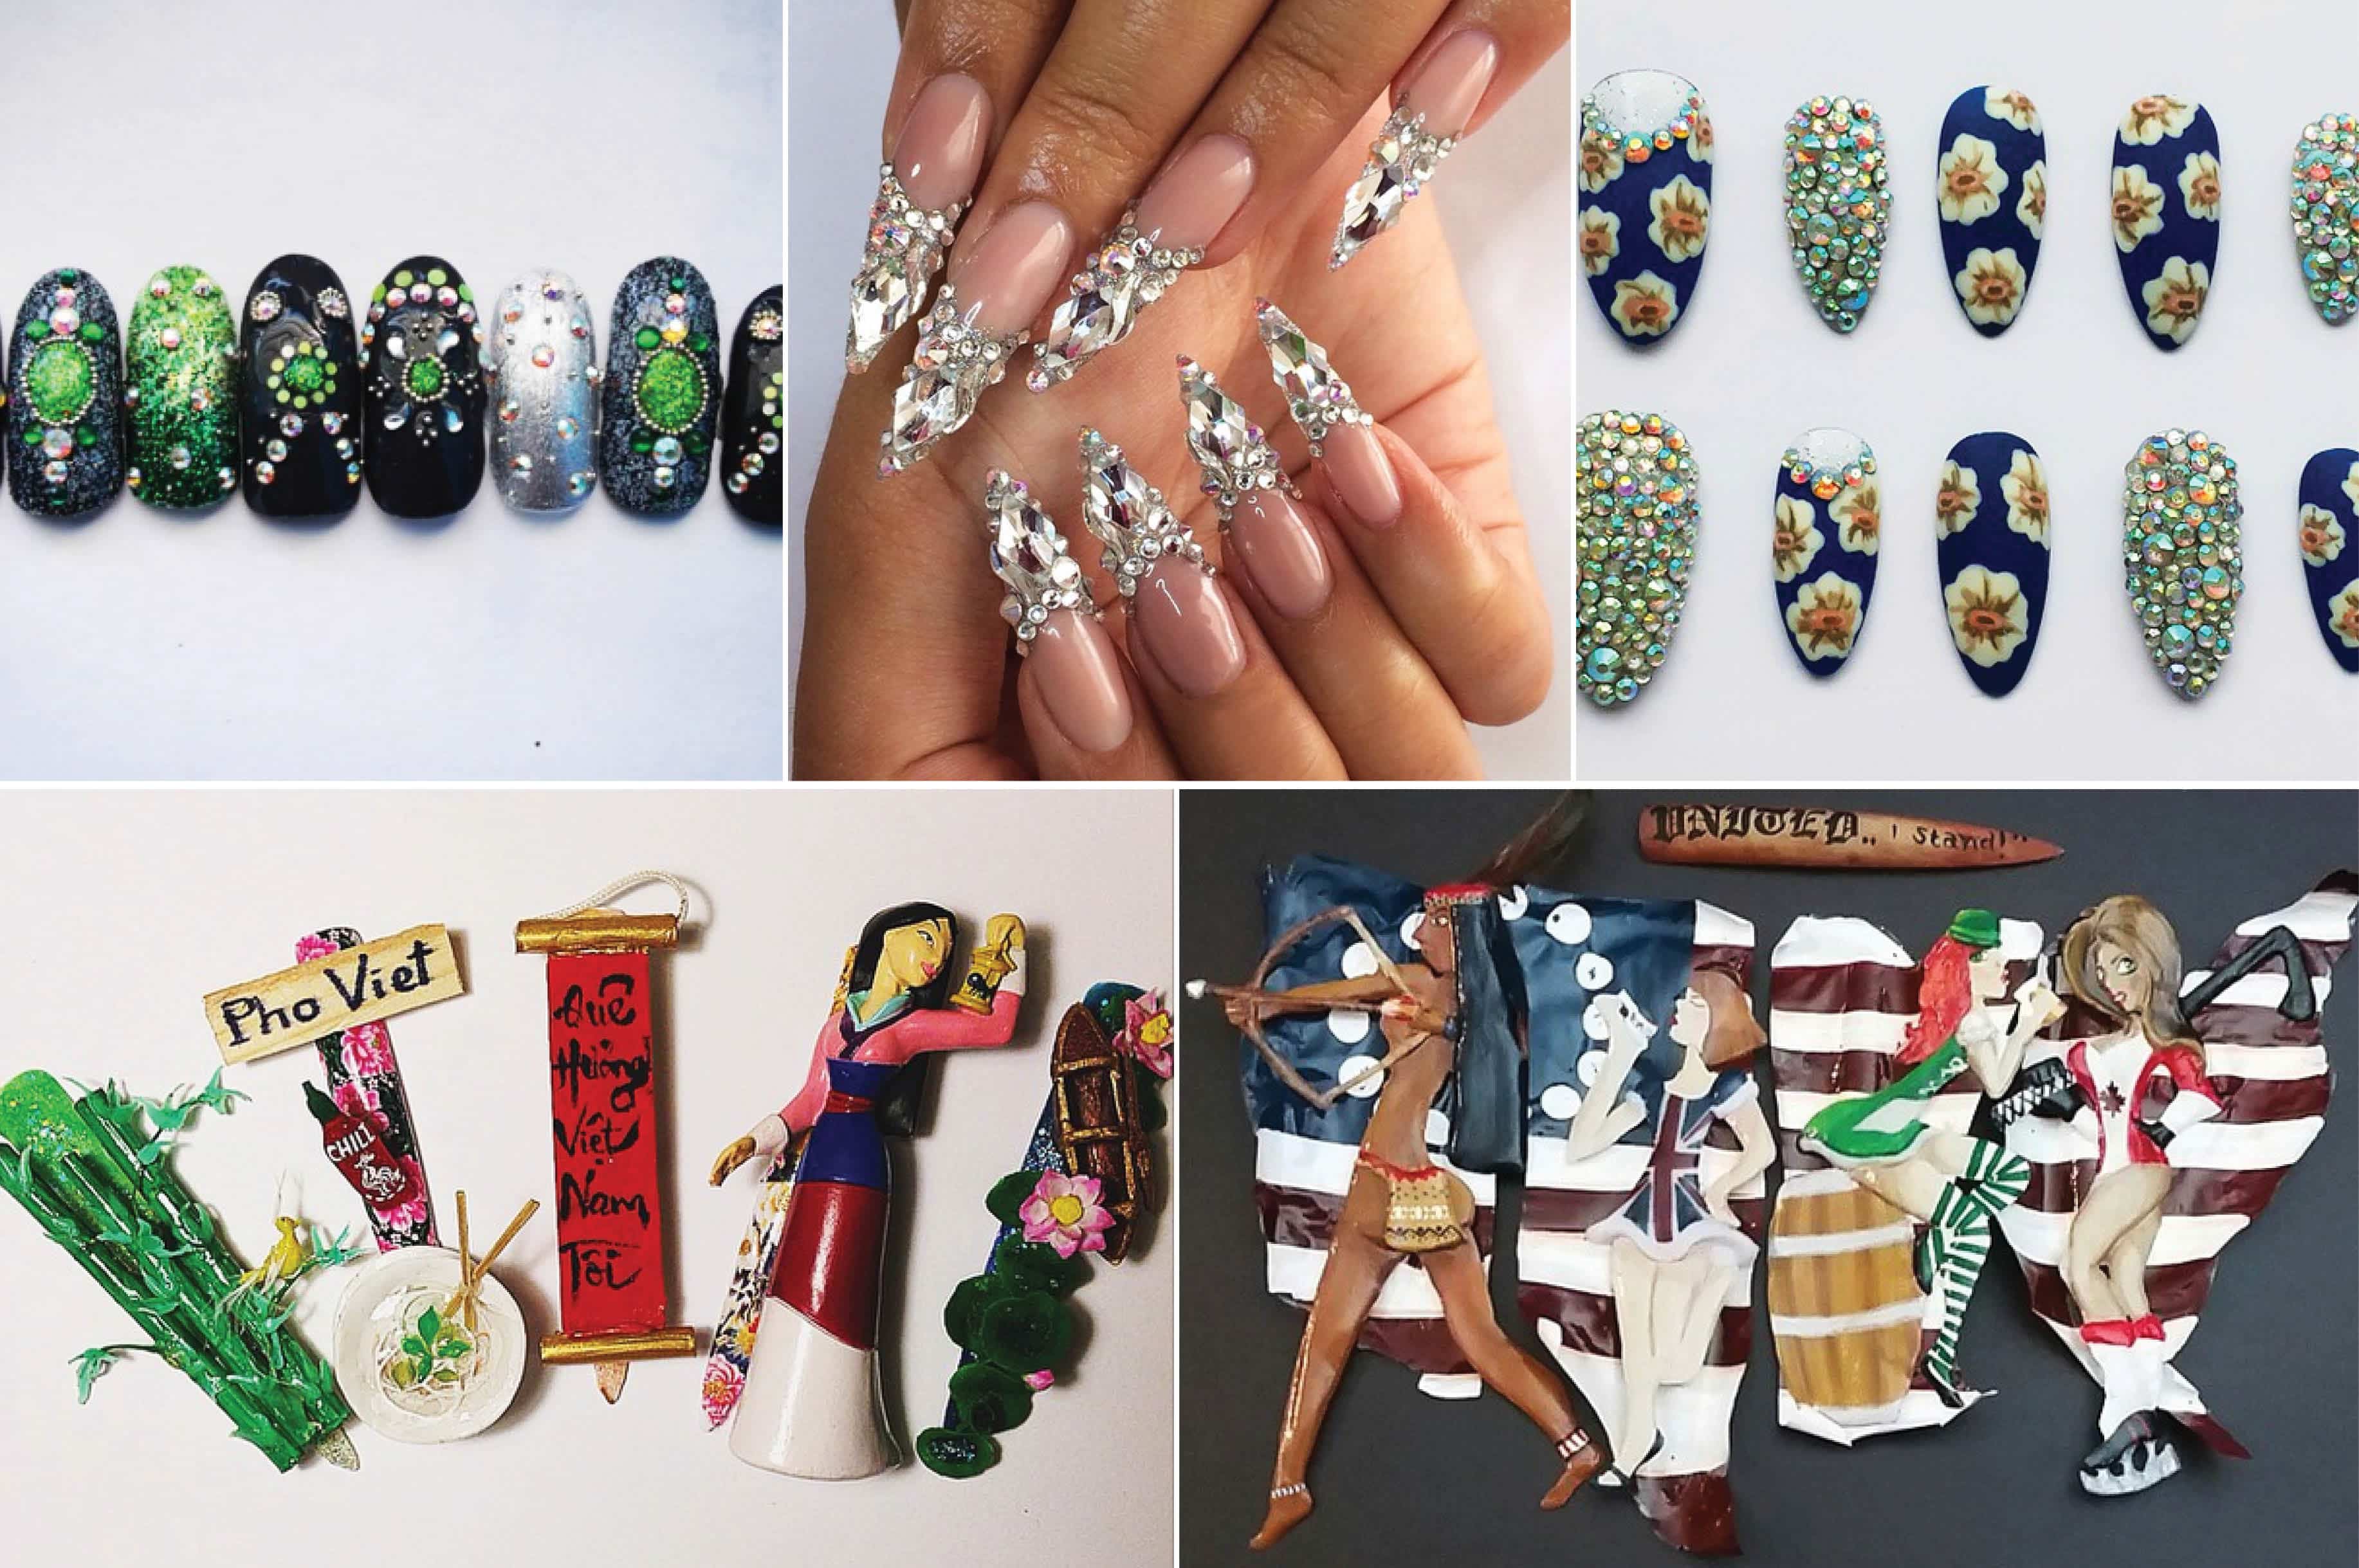 Design and Shine Nail Art Competition 2020 - Rhinestones Unlimited